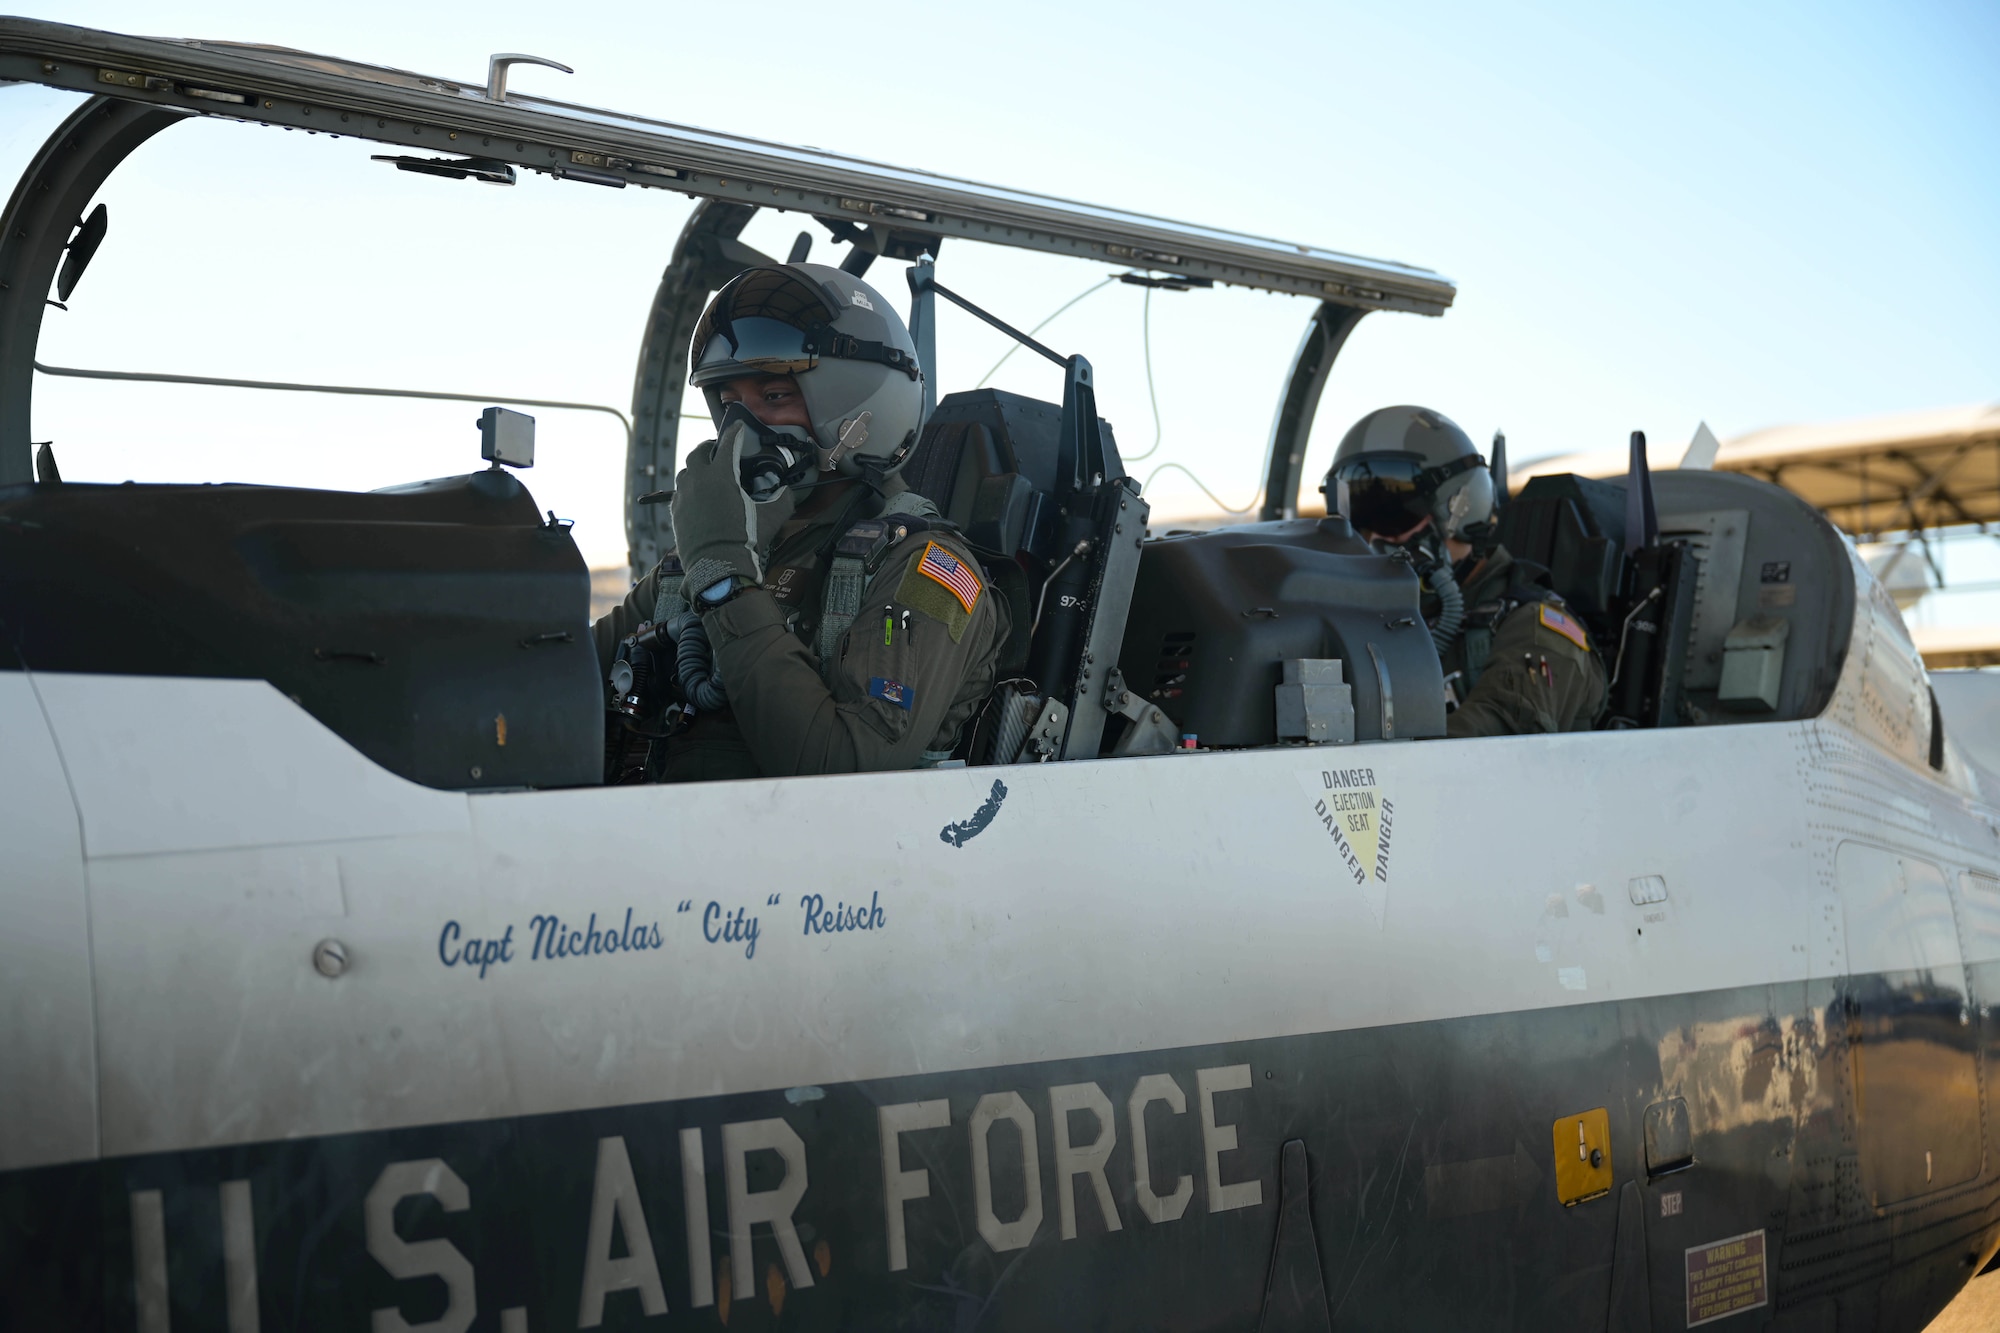 U.S. Air Force 2nd Lt. Clifford Mua (left), 41st Flying Training Squadron student pilot, and Maj. Samuel Berryhill, 41st Flying Training Squadron instructor pilot, begin flight preparations in the T-6 Texan II Nov. 4, 2020, on Columbus Air Force Base Miss. The T-6 aircraft is part of the second phase of Specialize Undergraduate Pilot Training where students learn aircraft flight characteristics, emergency procedures, takeoff and landing procedures, aerobatics and formation flying. (U.S. Air Force photo by Senior Airman Jake Jacobsen)